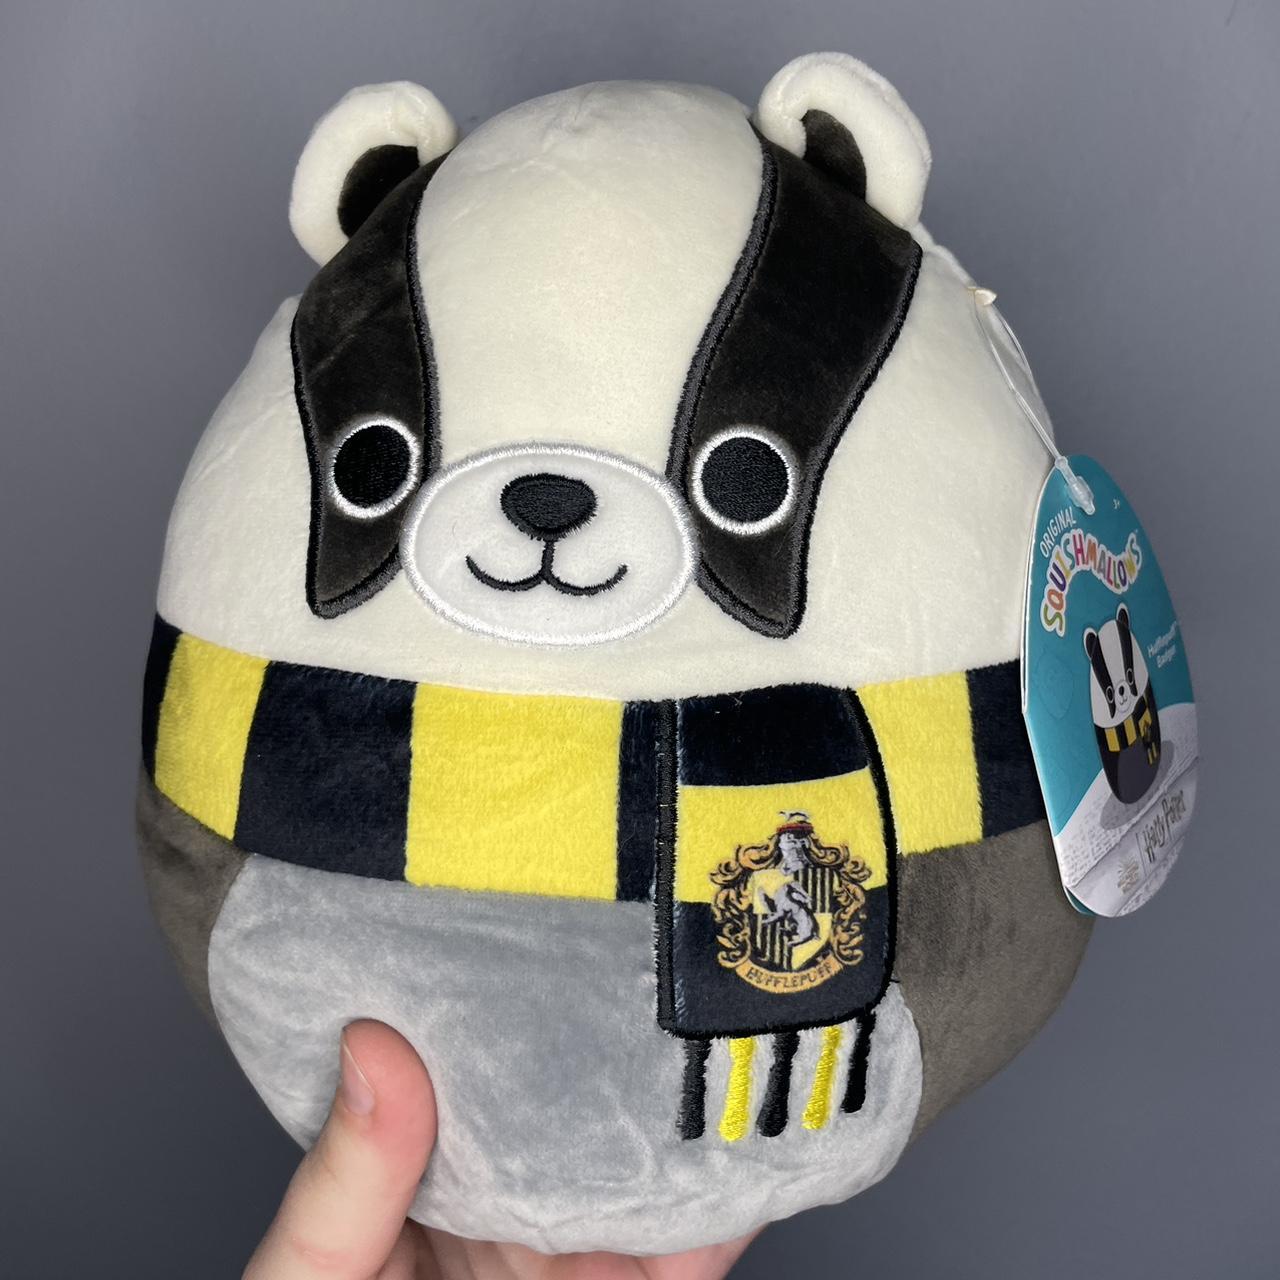 Squishmallow Harry Potter Hufflepuff Badger 8 Stuffed Plush by